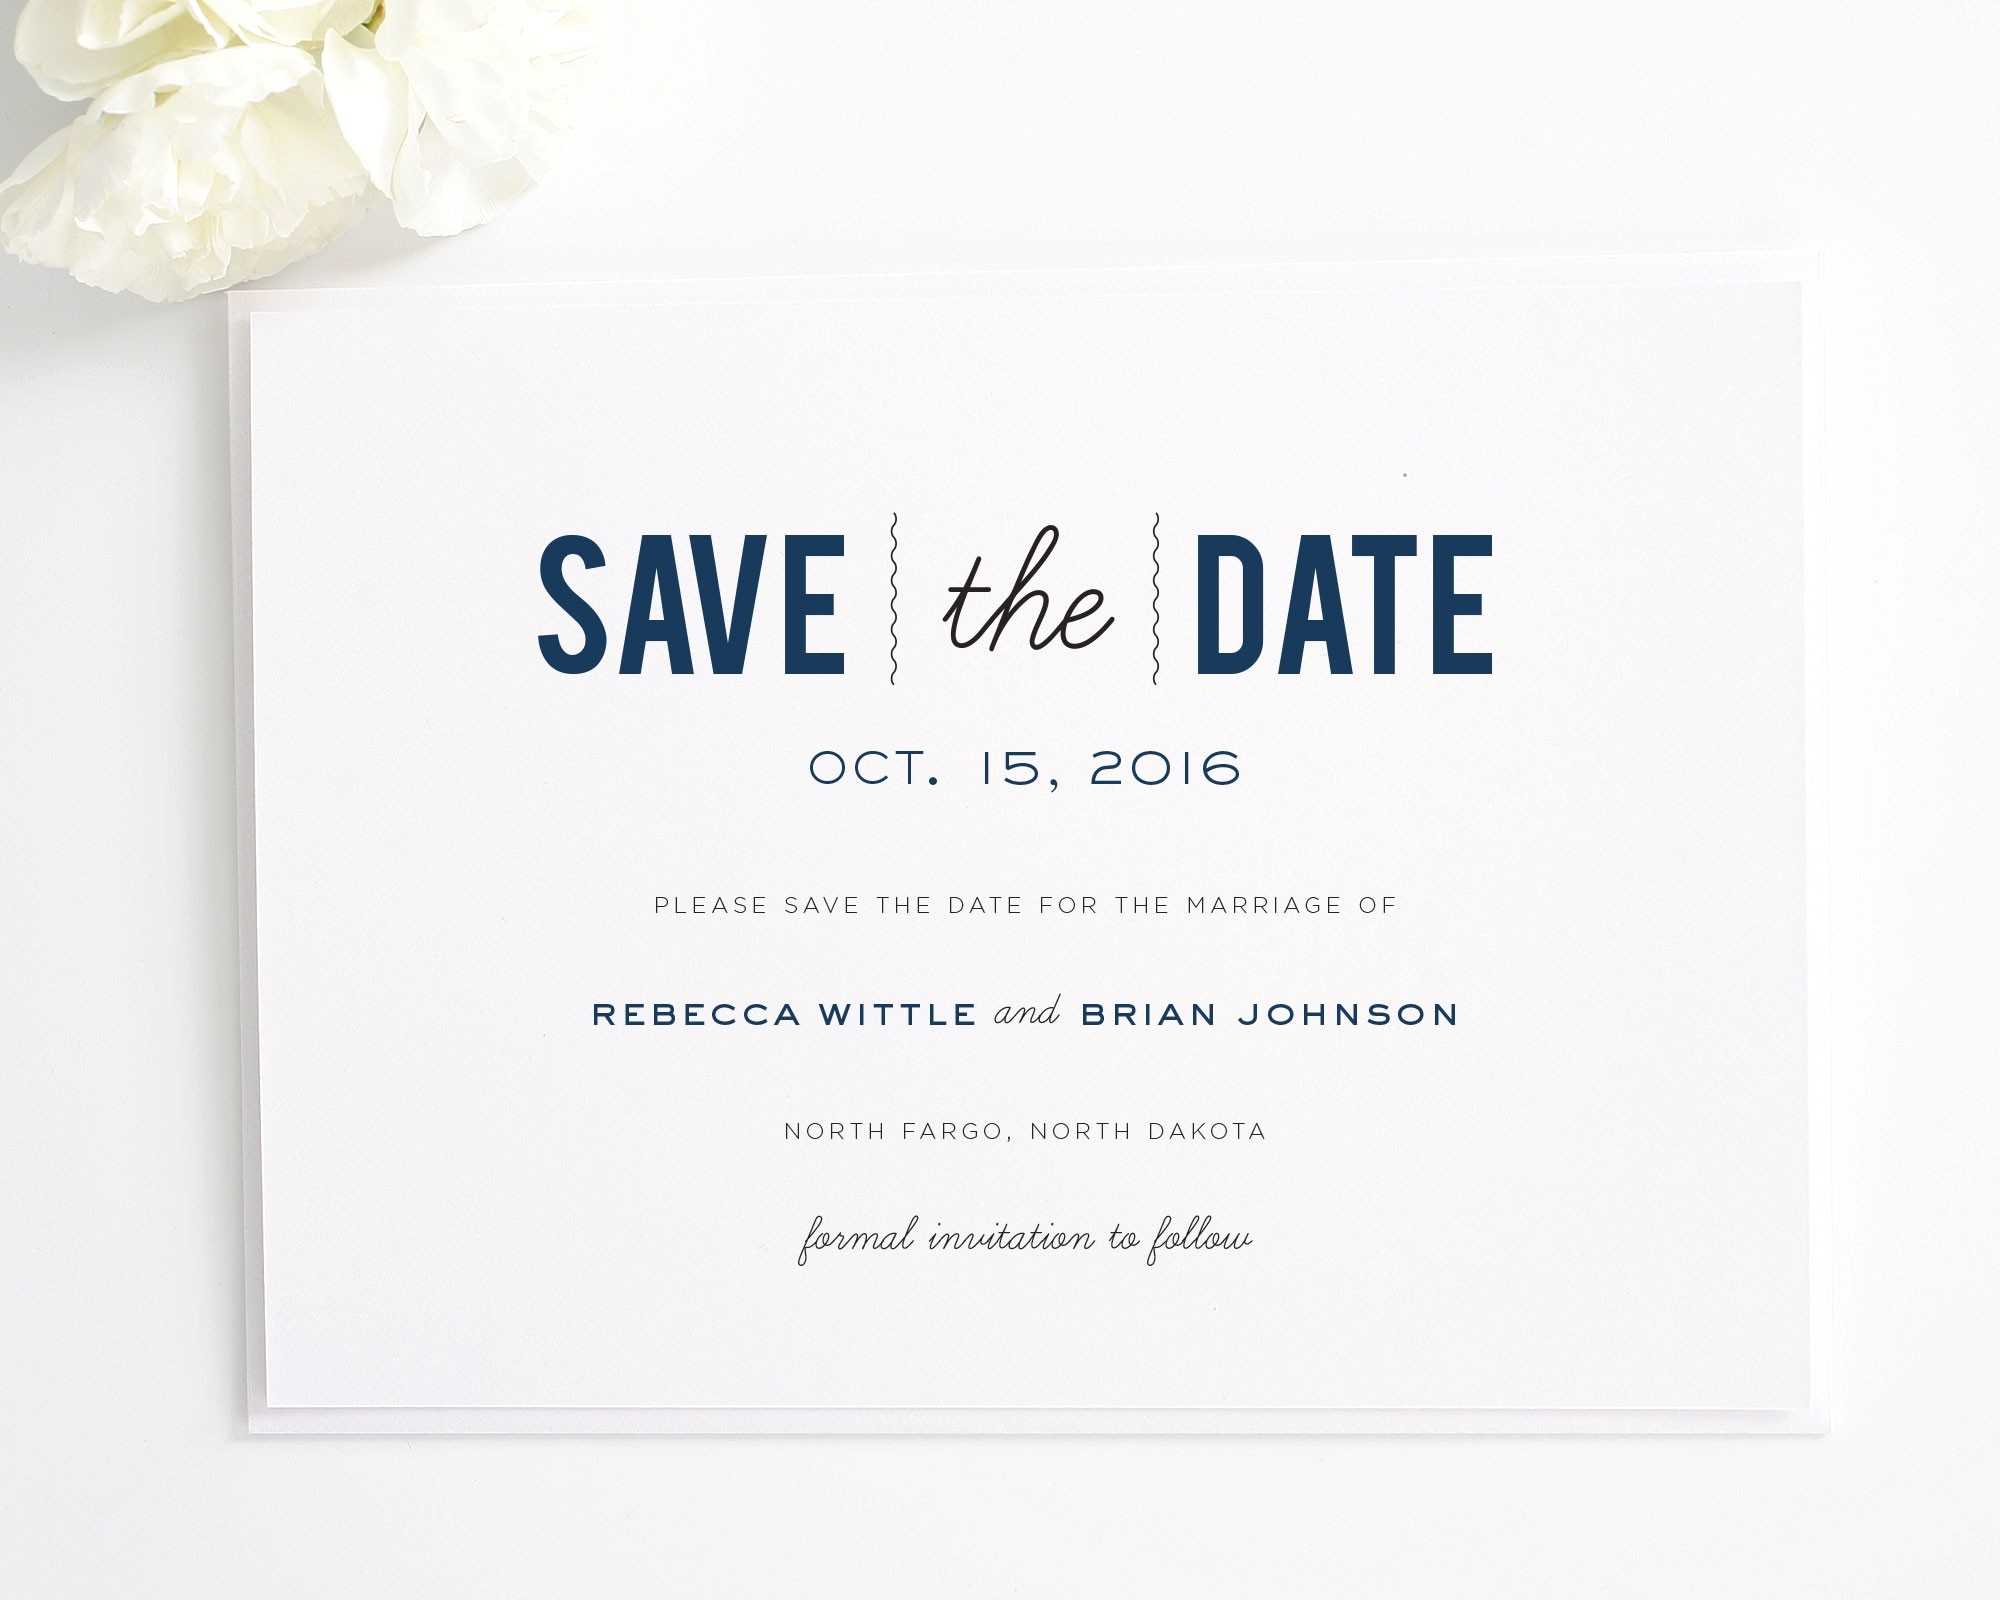 003 Save The Date Template Word Precious Sample Retire Party With Save The Date Template Word